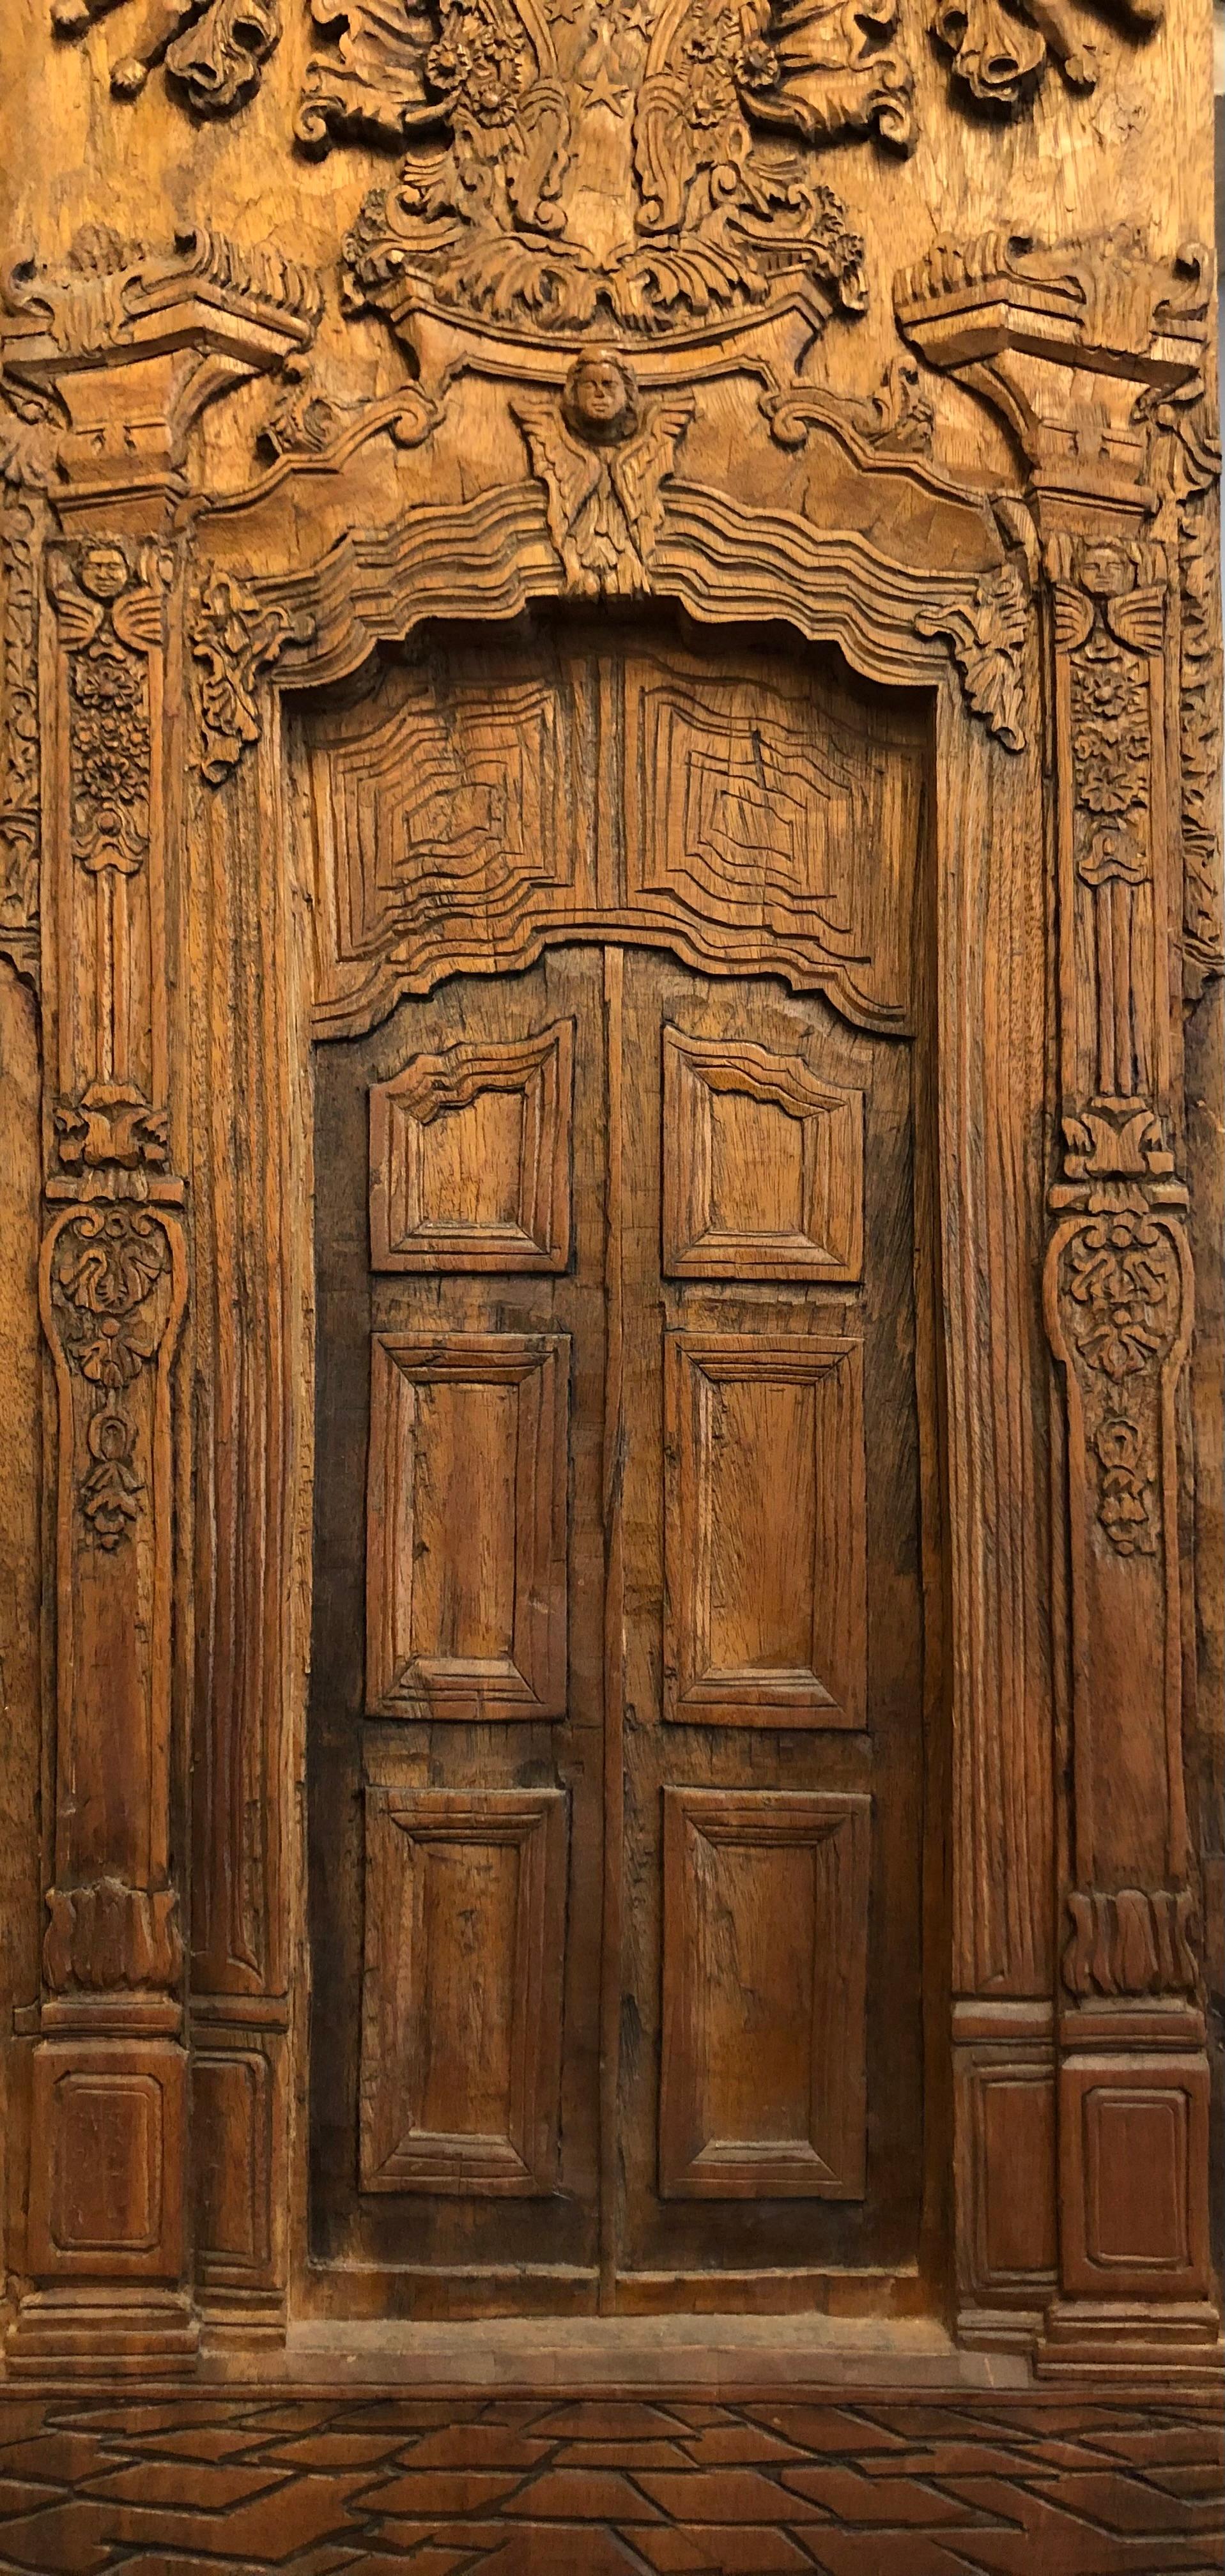 A decorative,  classical carved oak panel with very intricate detail, depicting the facade of a church:  a panelled doorway with fanciful columns on either side,  surmounted by carved angels, scrolls and elaborate pediments. The bottom of the panel